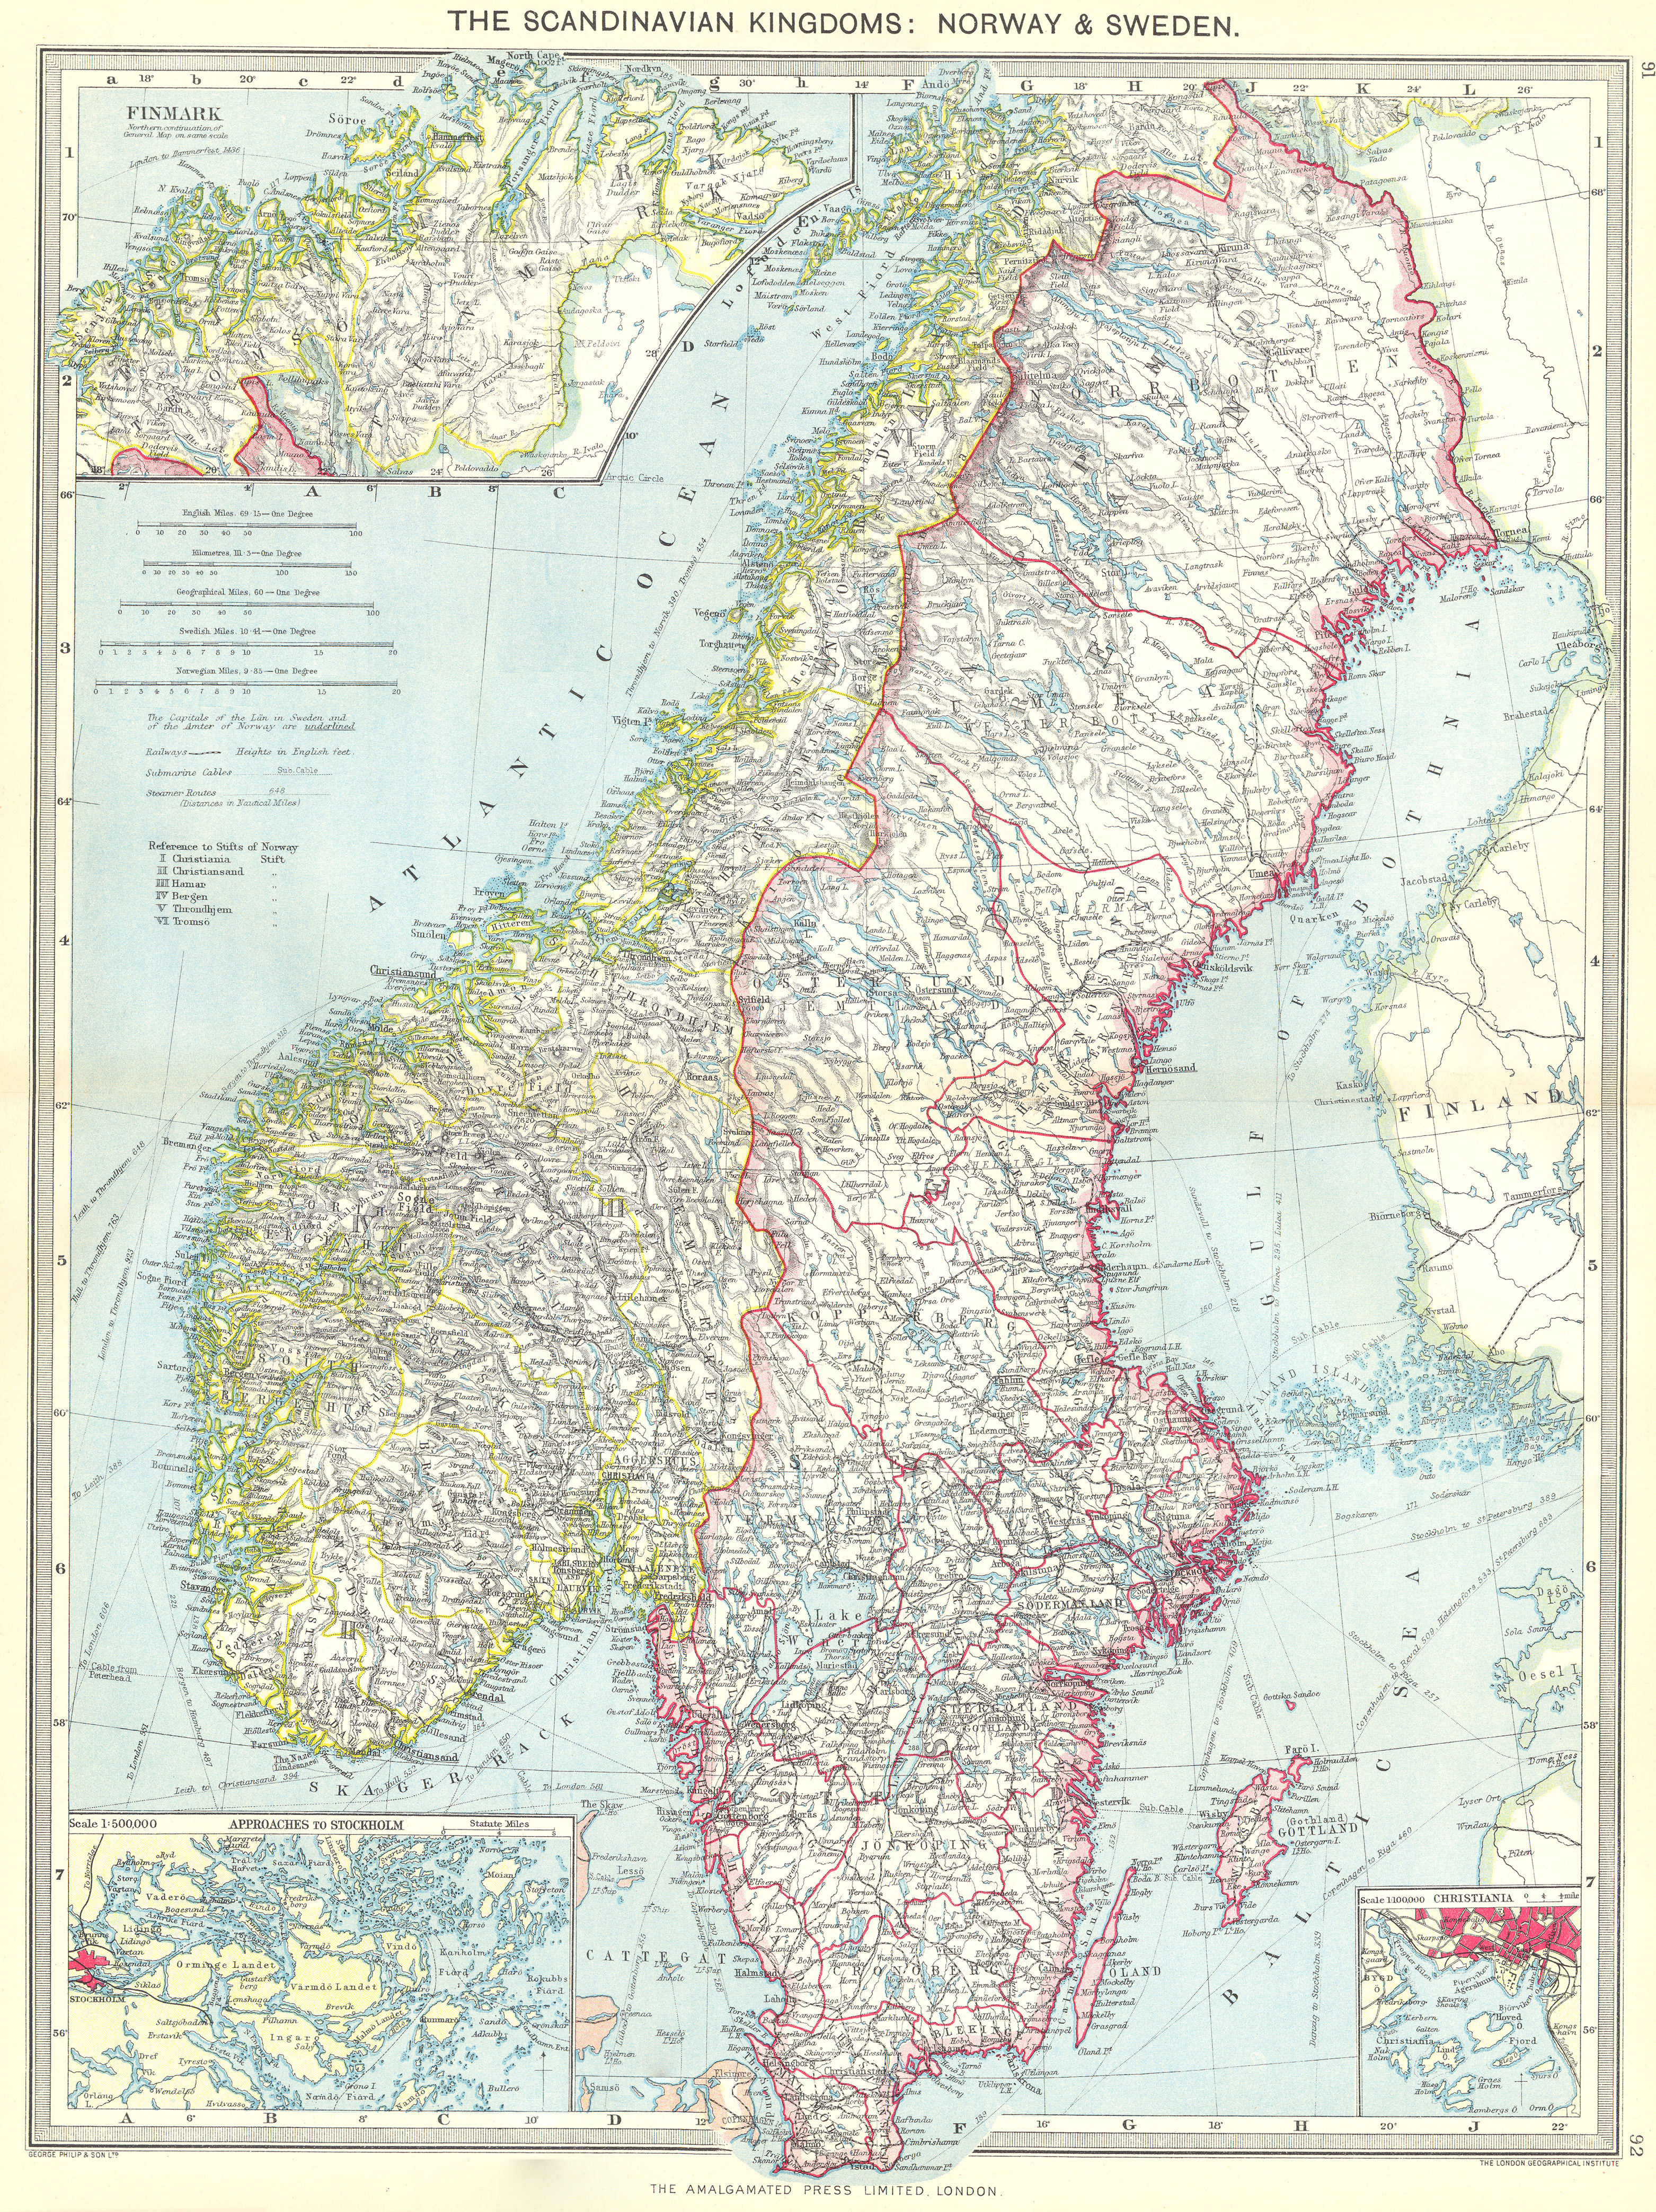 Associate Product SCANDINAVIA. Norway and Sweden; Finmark; Stockholm; Oslo 1907 old antique map